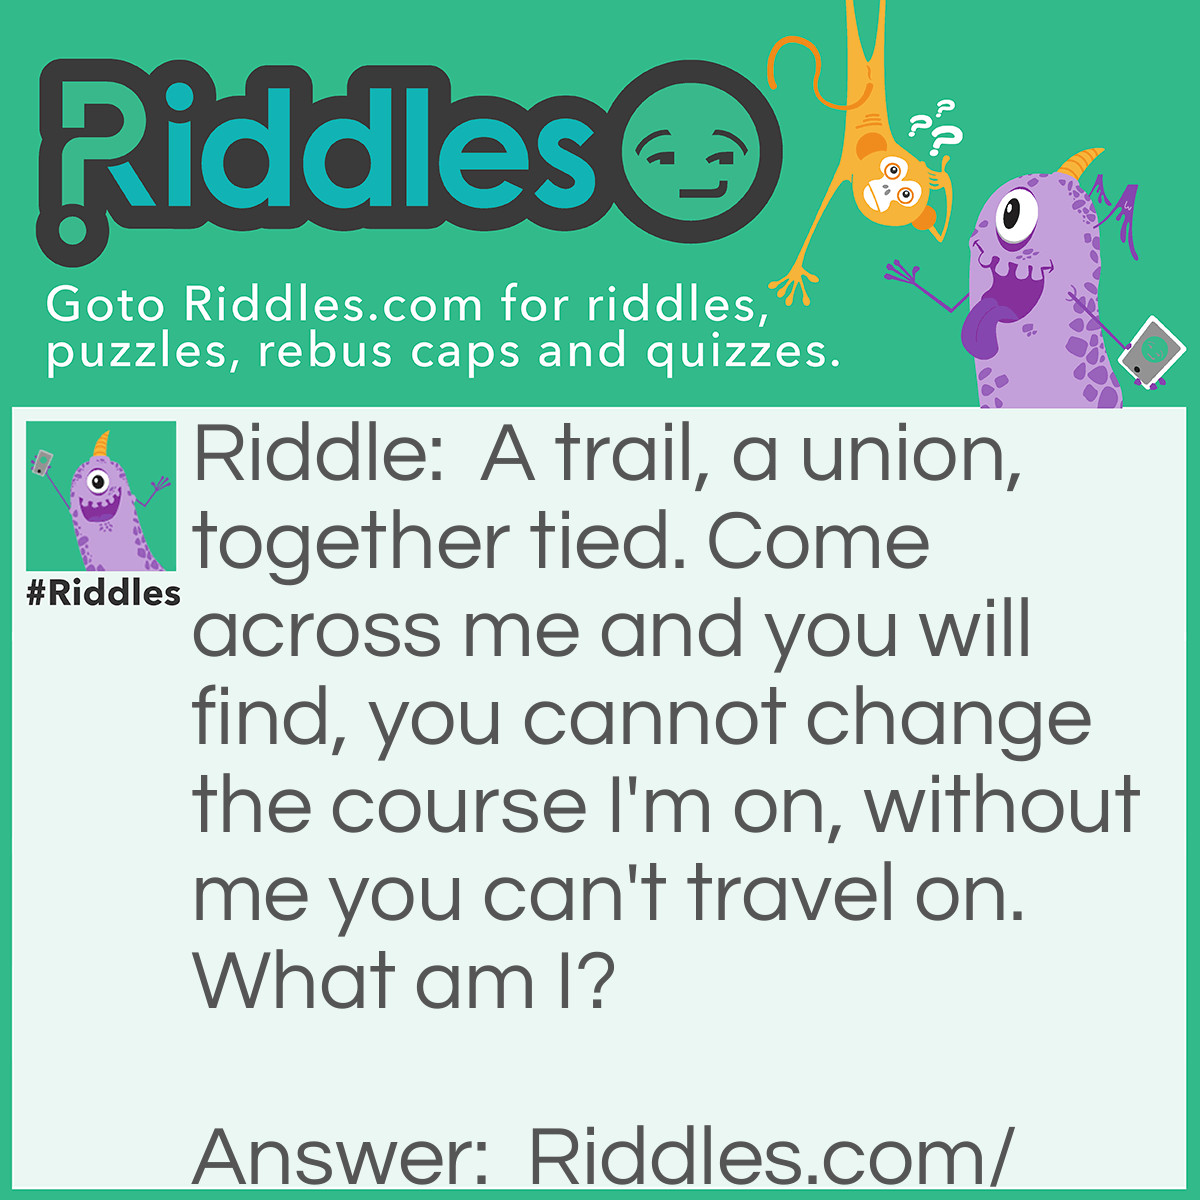 Riddle: A trail, a union, together tied. Come across me and you will find, you cannot change the course I'm on, without me you can't travel on. What am I? Answer: Railroad Tracks.